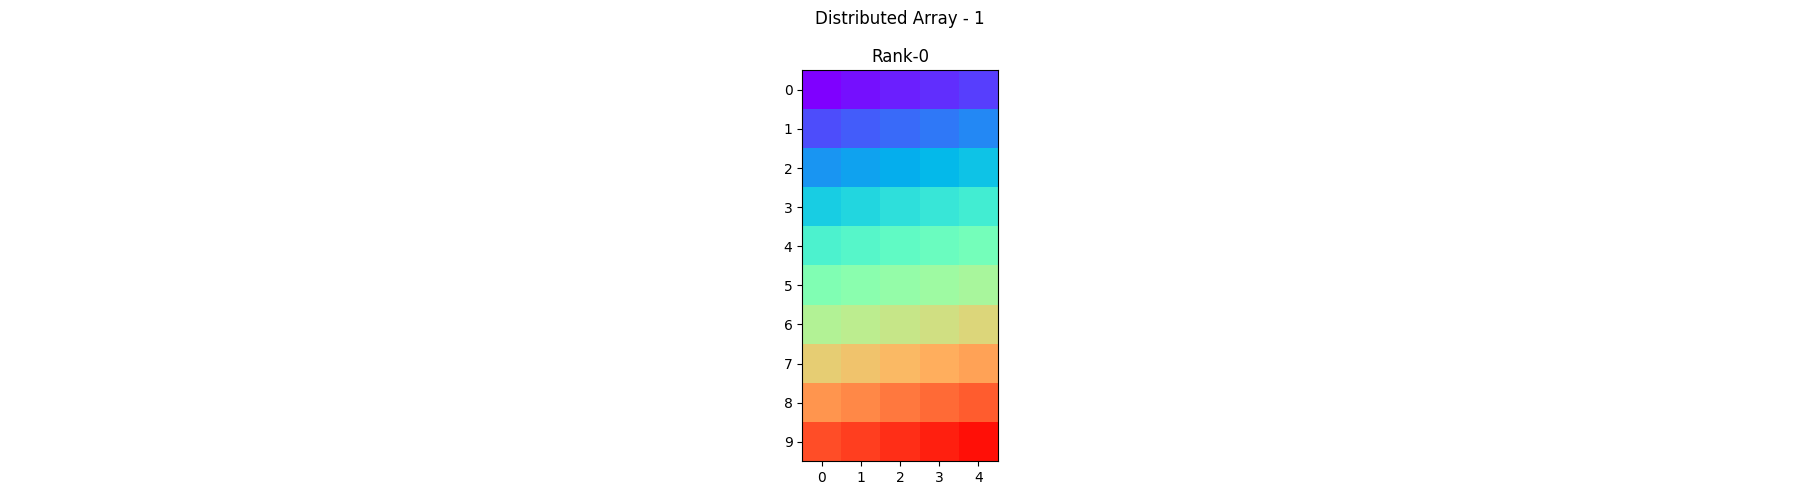 Distributed Array - 1, Rank-0